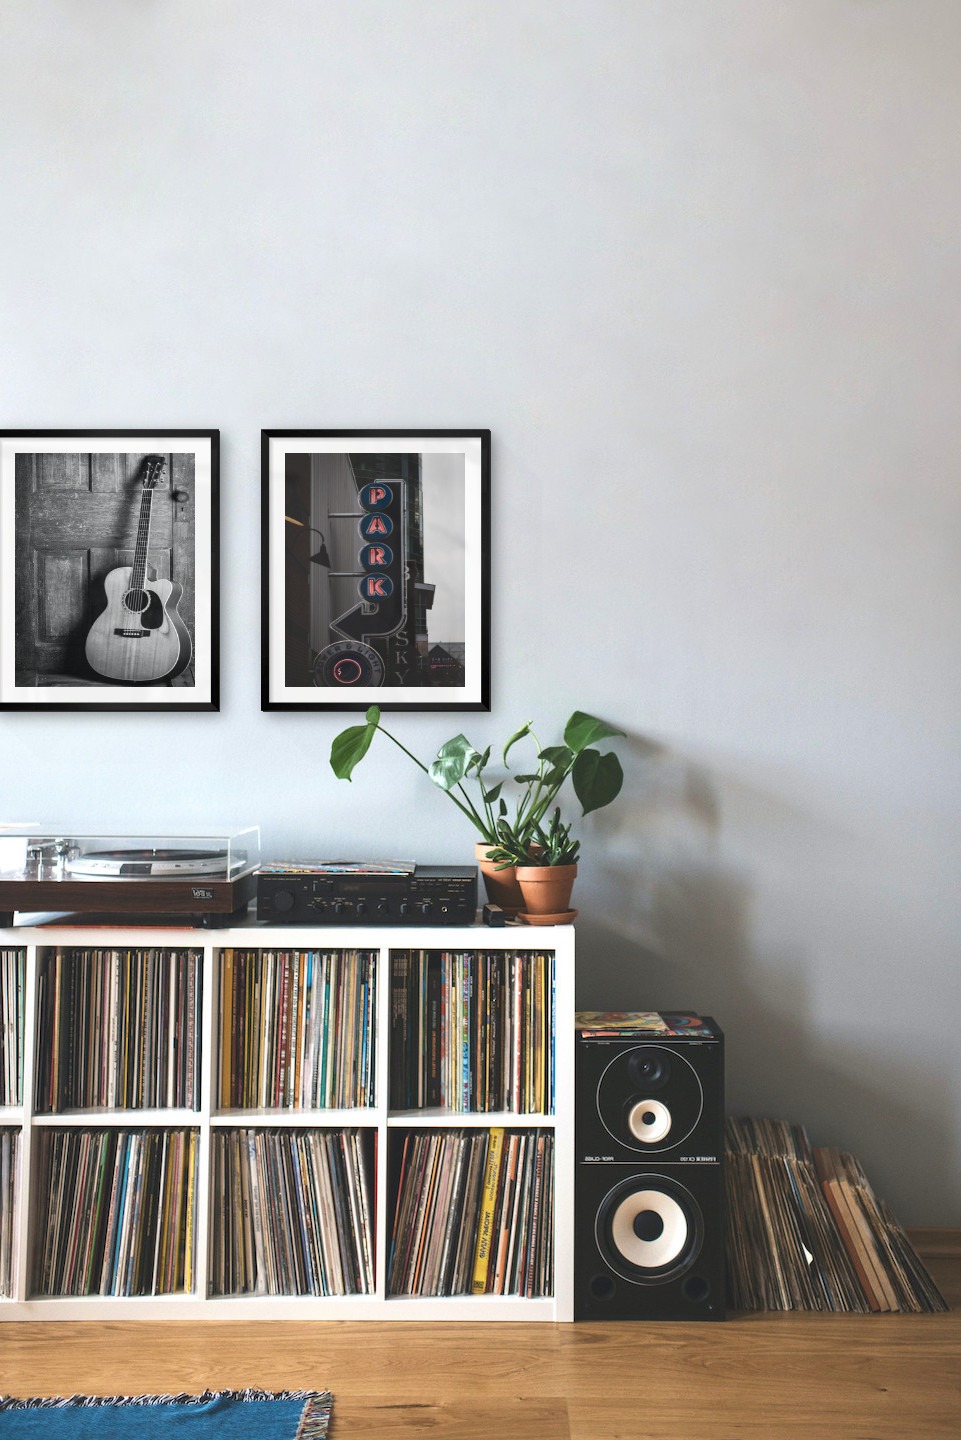 Gallery wall with picture frames in black in sizes 40x50 with prints "Guitar" and "Sign "Park""